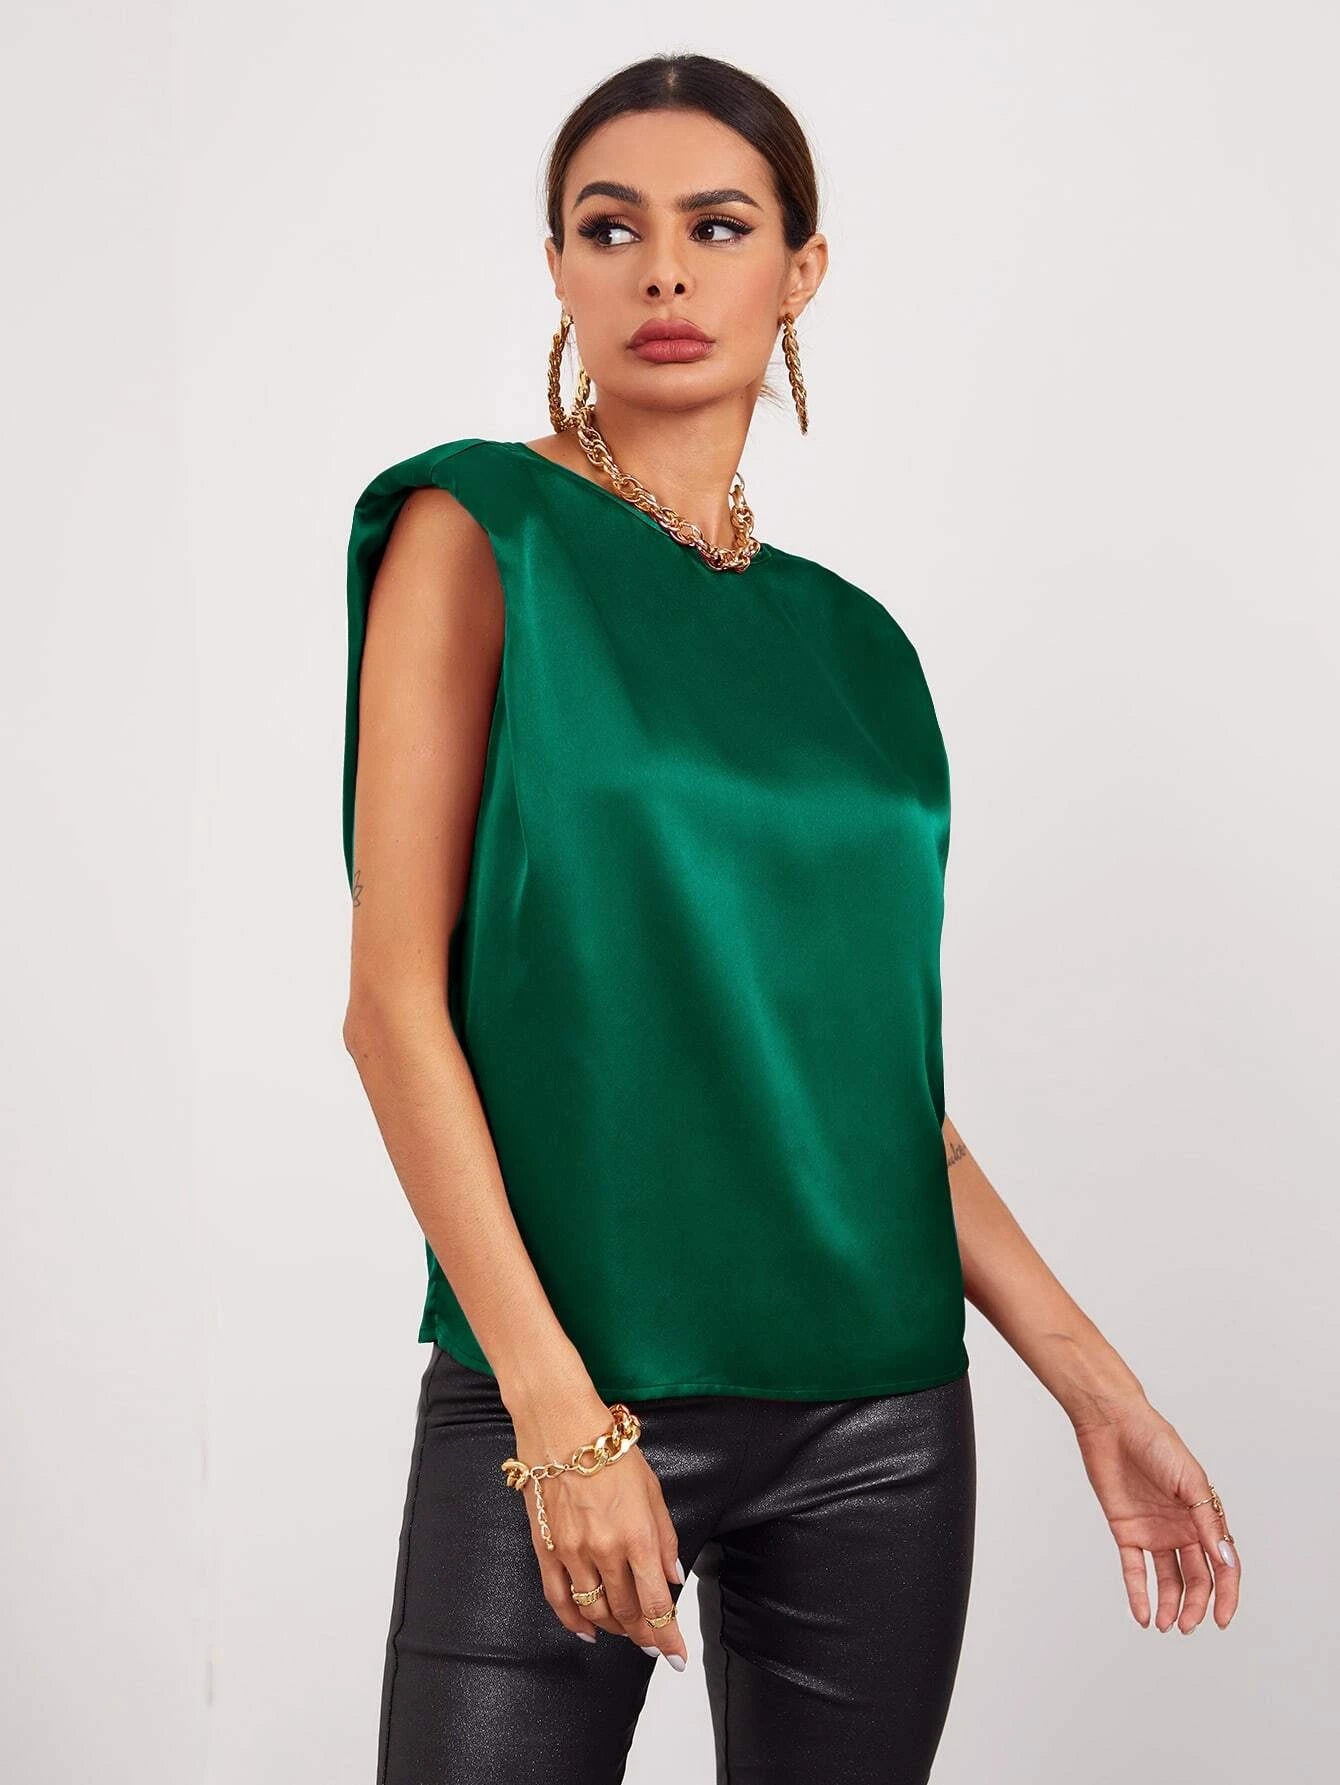 SHEIN Unity Solid Sleeveless Shoulder Pad Satin Top